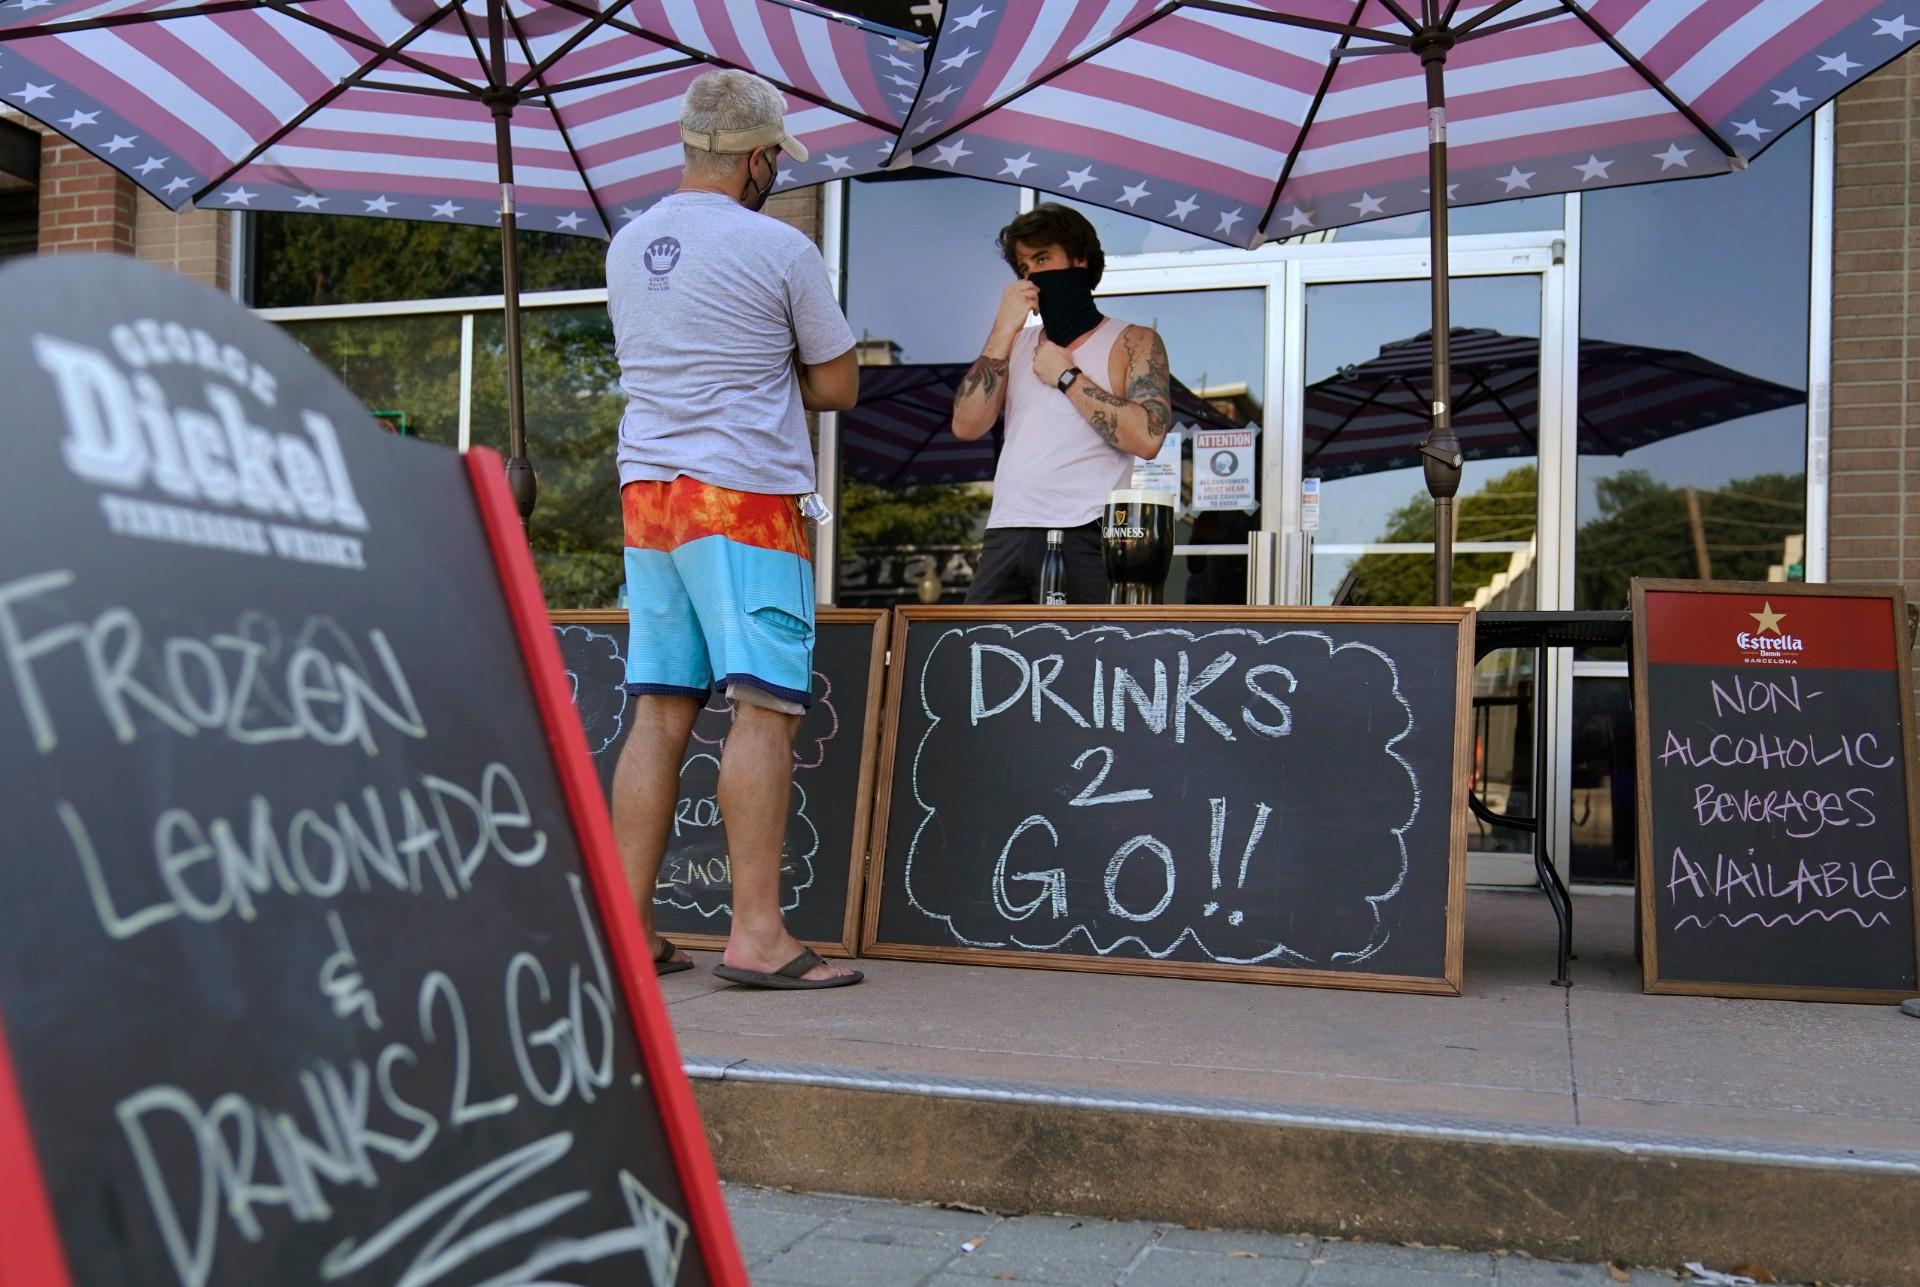 A drinks-to-go table is set up outside the Old Crow bar on Greenville Avenue in Dallas, Thursday, Aug. 13, 2020. Some states and cities in the U.S. are allowing cocktails to go due to the pandemic. (AP Photo / LM Otero)